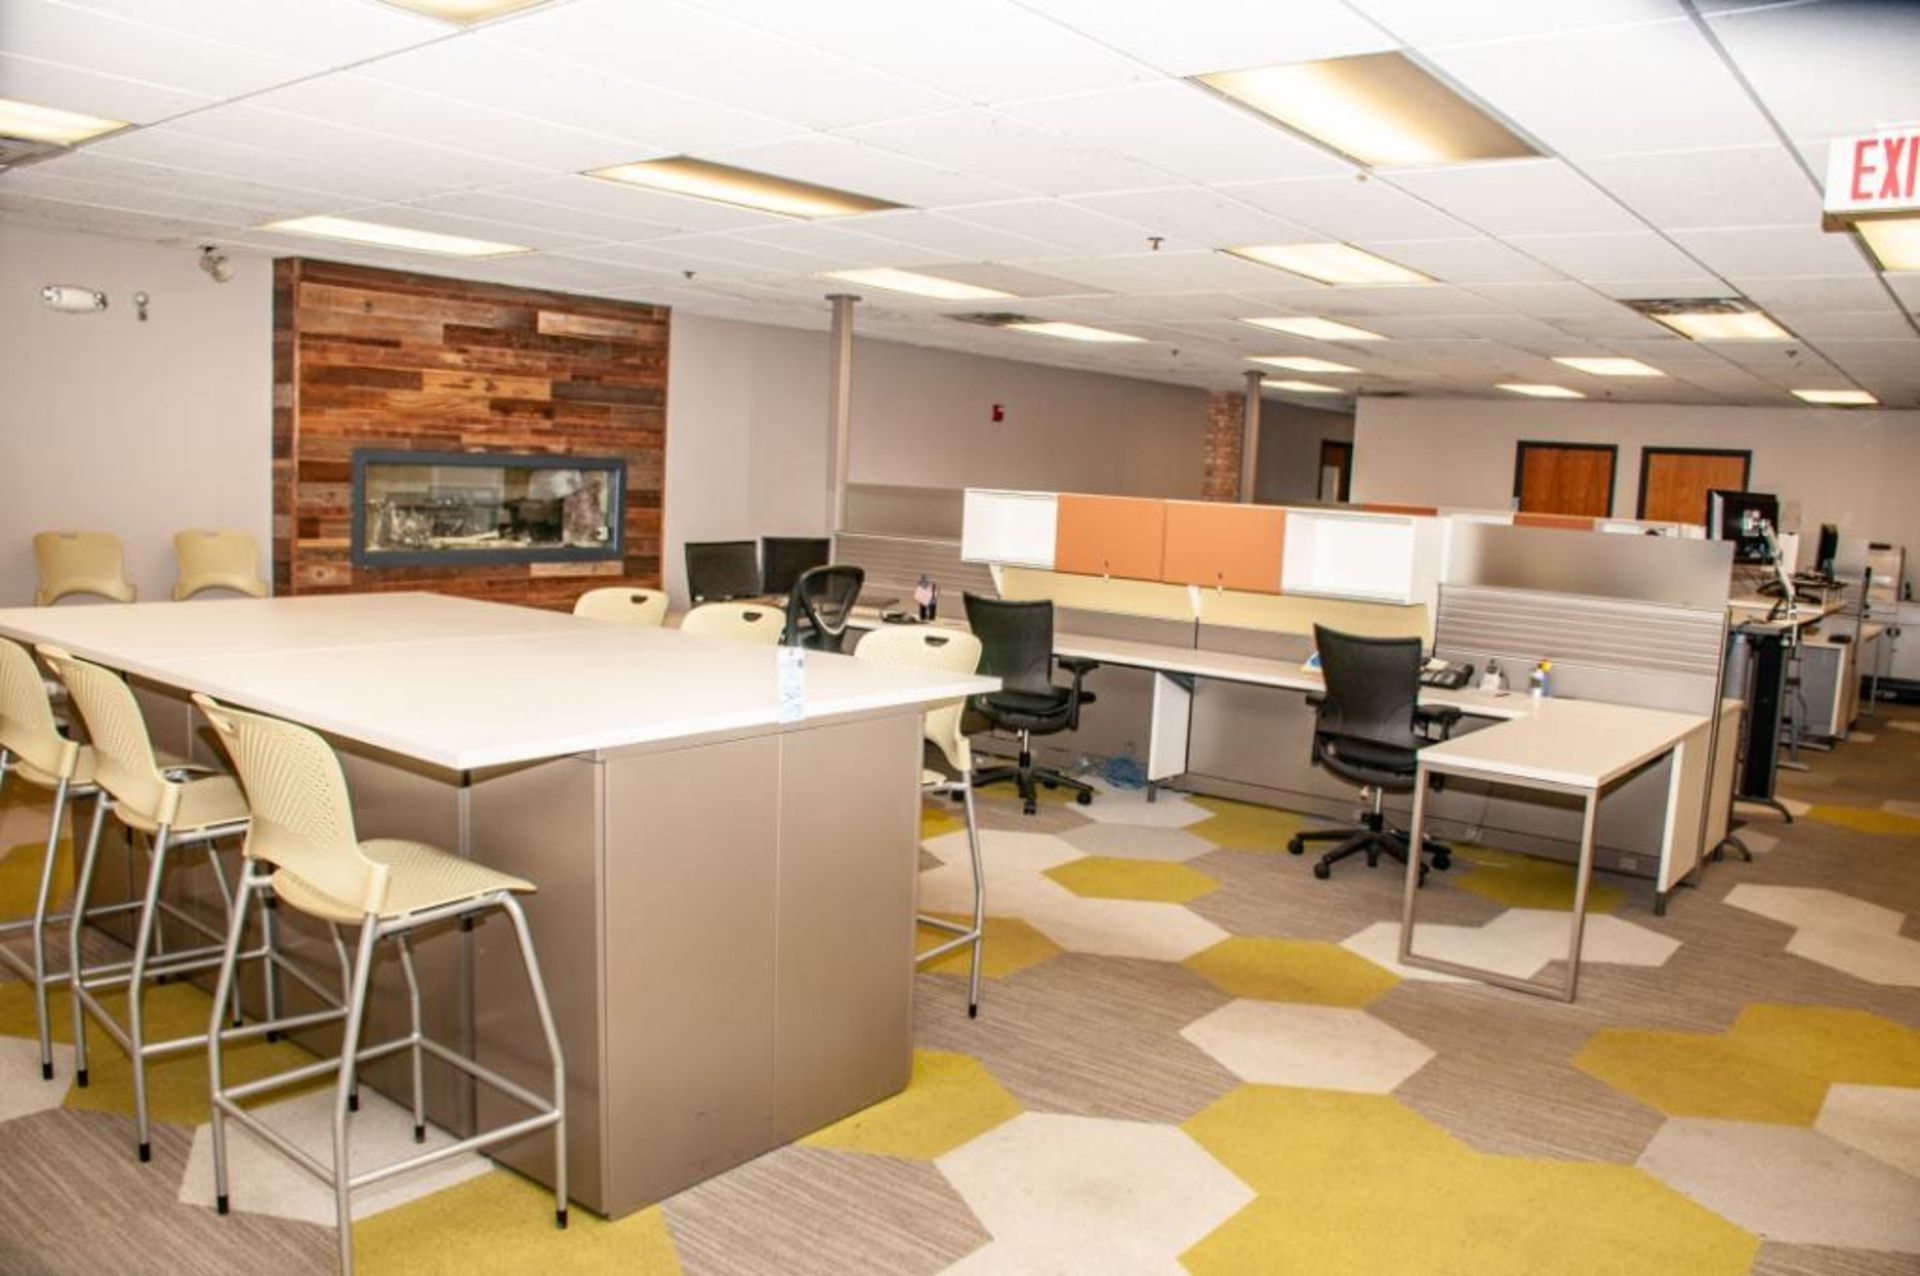 Lot c/o: Cubicles and Work Stations straight in from main entrance & right side, desks, chairs, comp